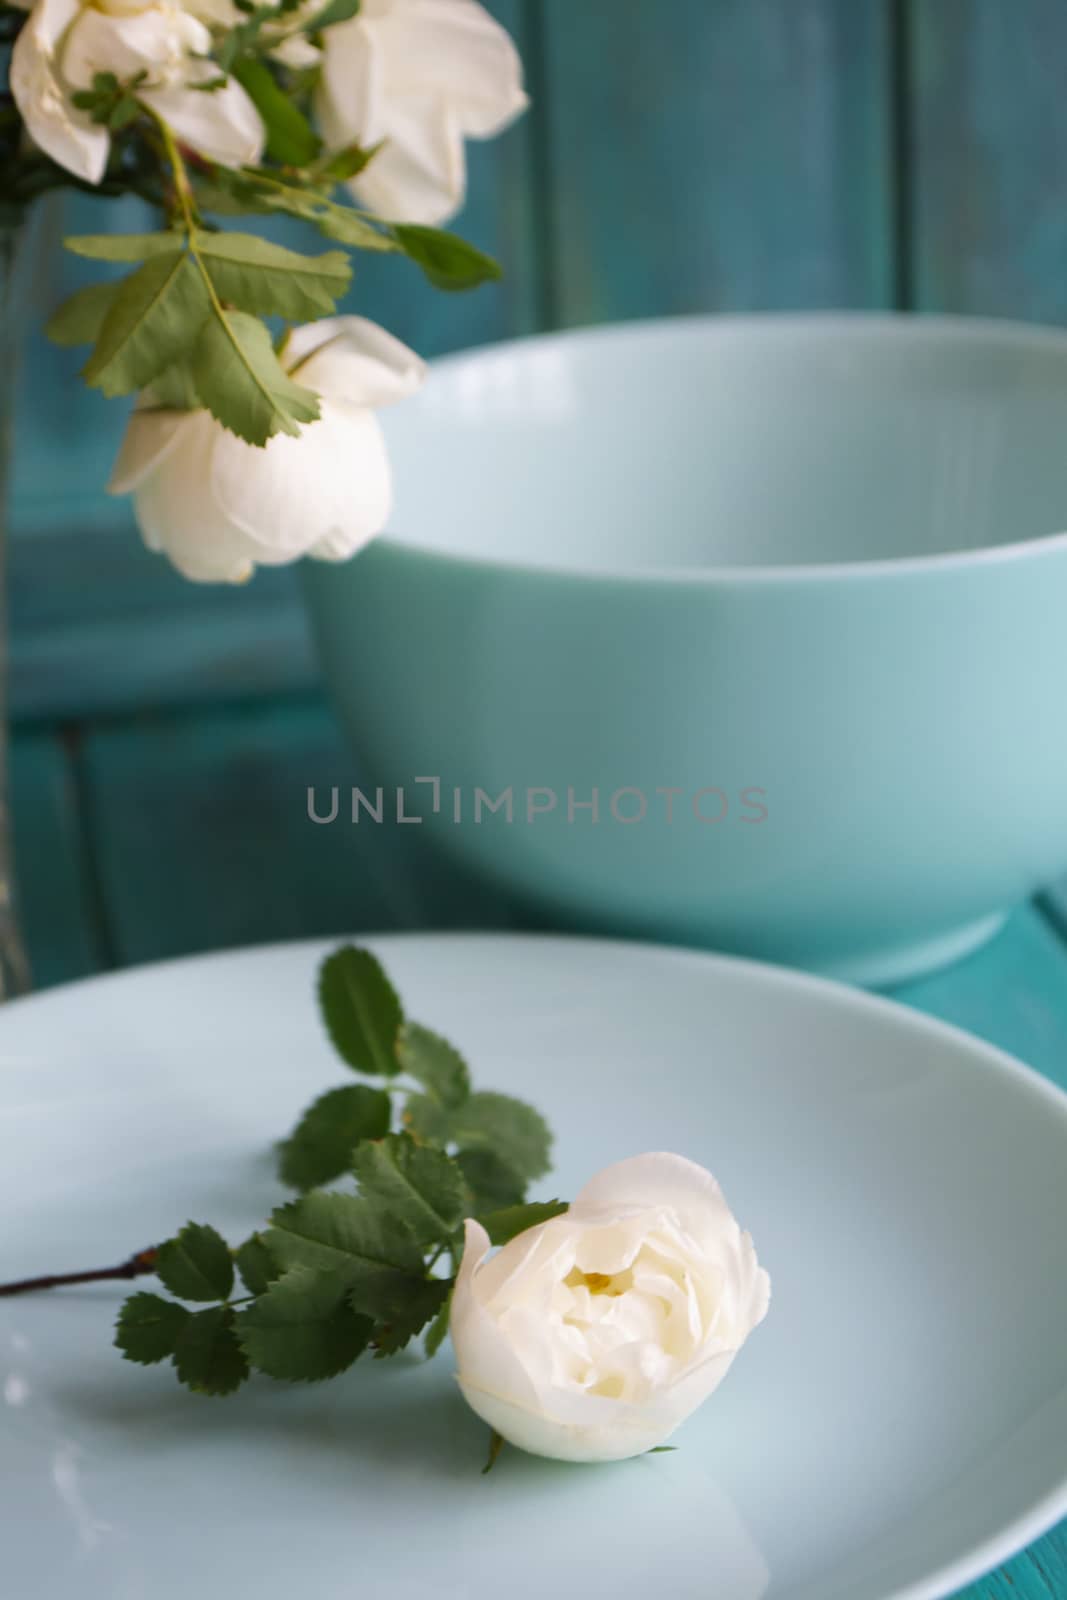 Romantic table setting with bouquet of roses, dishware, on holiday teal table.